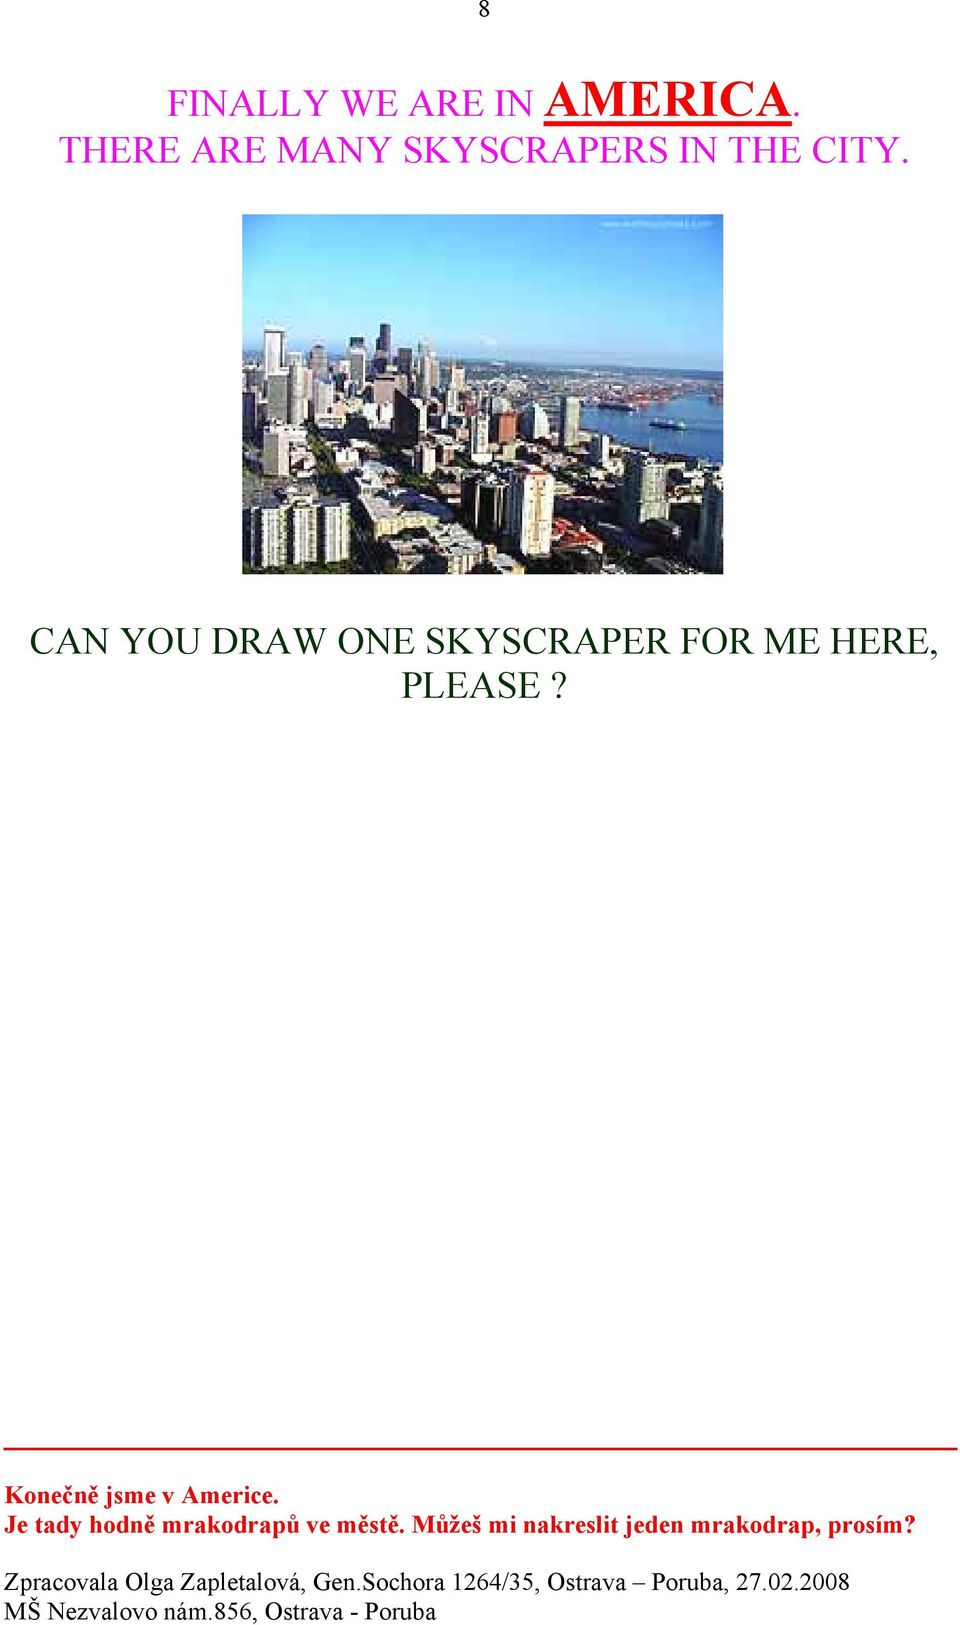 CAN YOU DRAW ONE SKYSCRAPER FOR ME HERE, PLEASE?